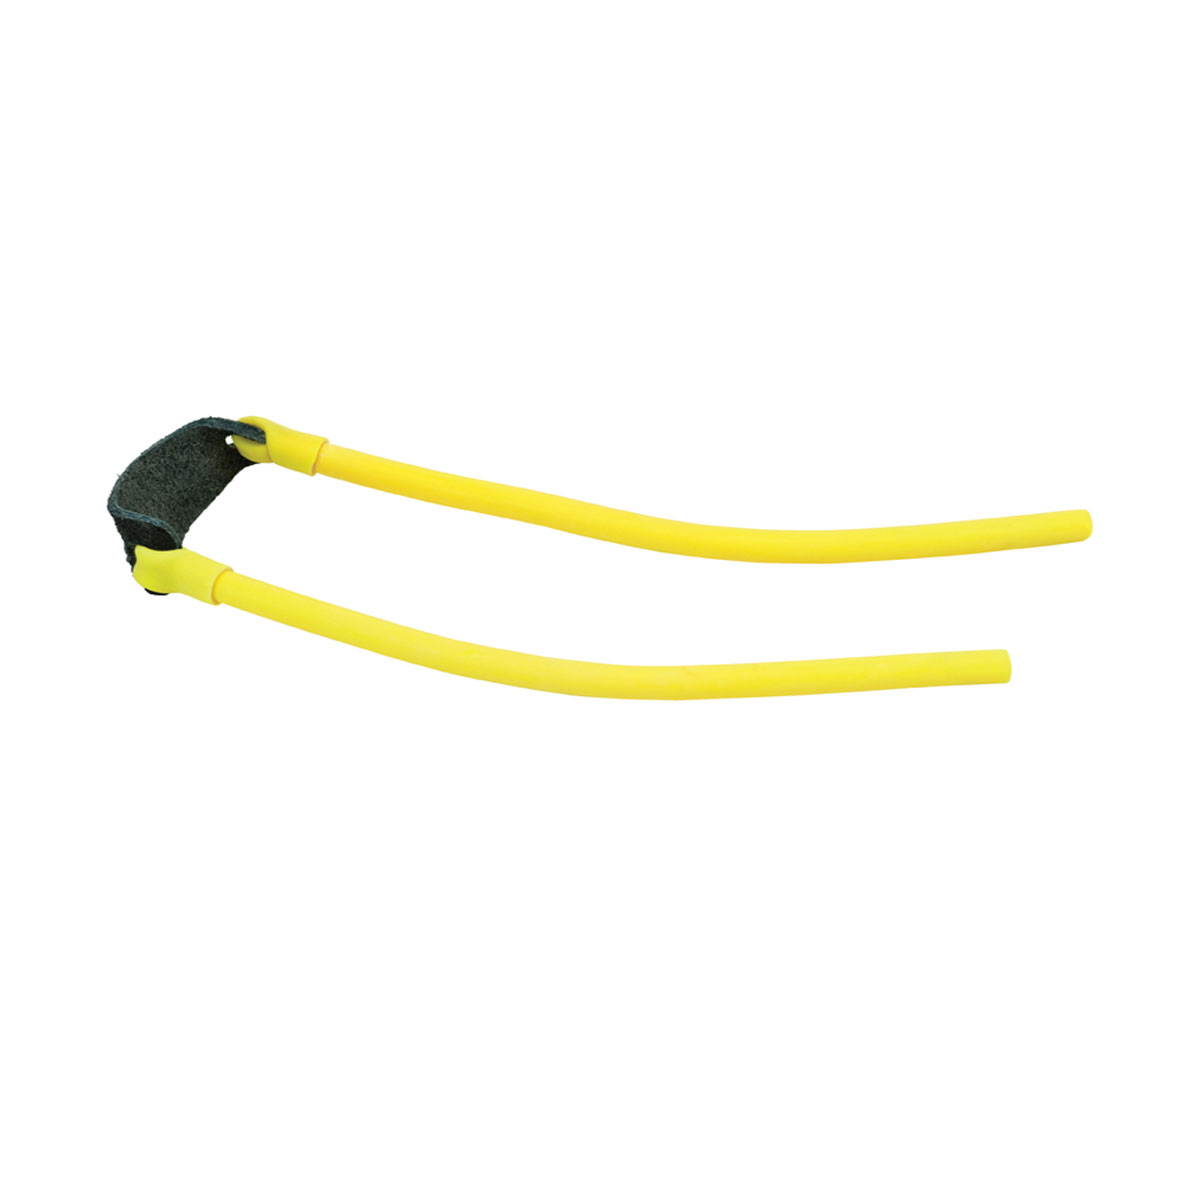 Daisy 8172 B52 Powerline Surgical Tubing Replacement Slingshot Strap Band for sale online 